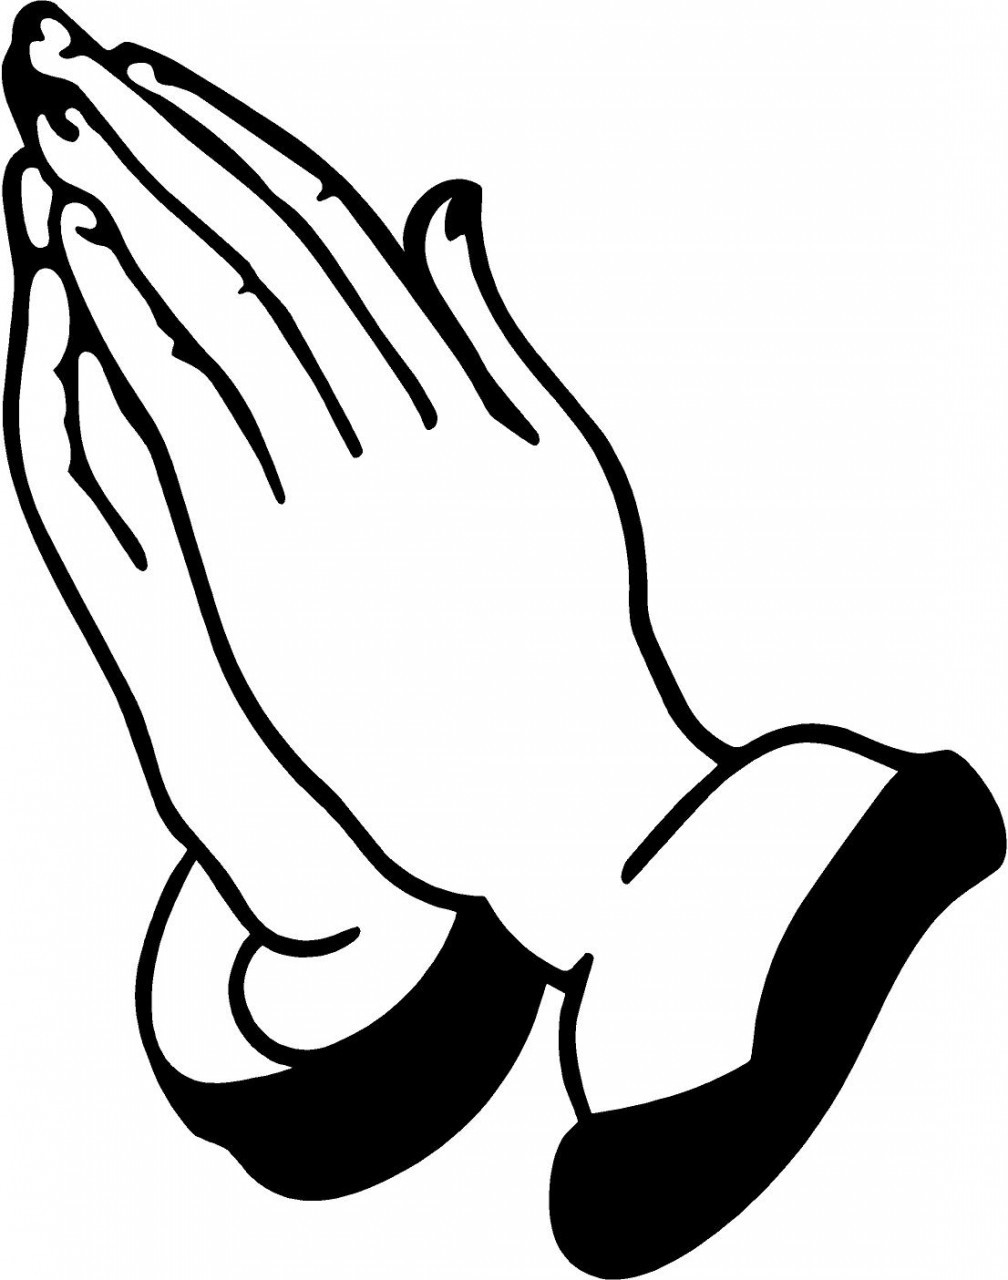 Praying hands with rosary clip art clipart